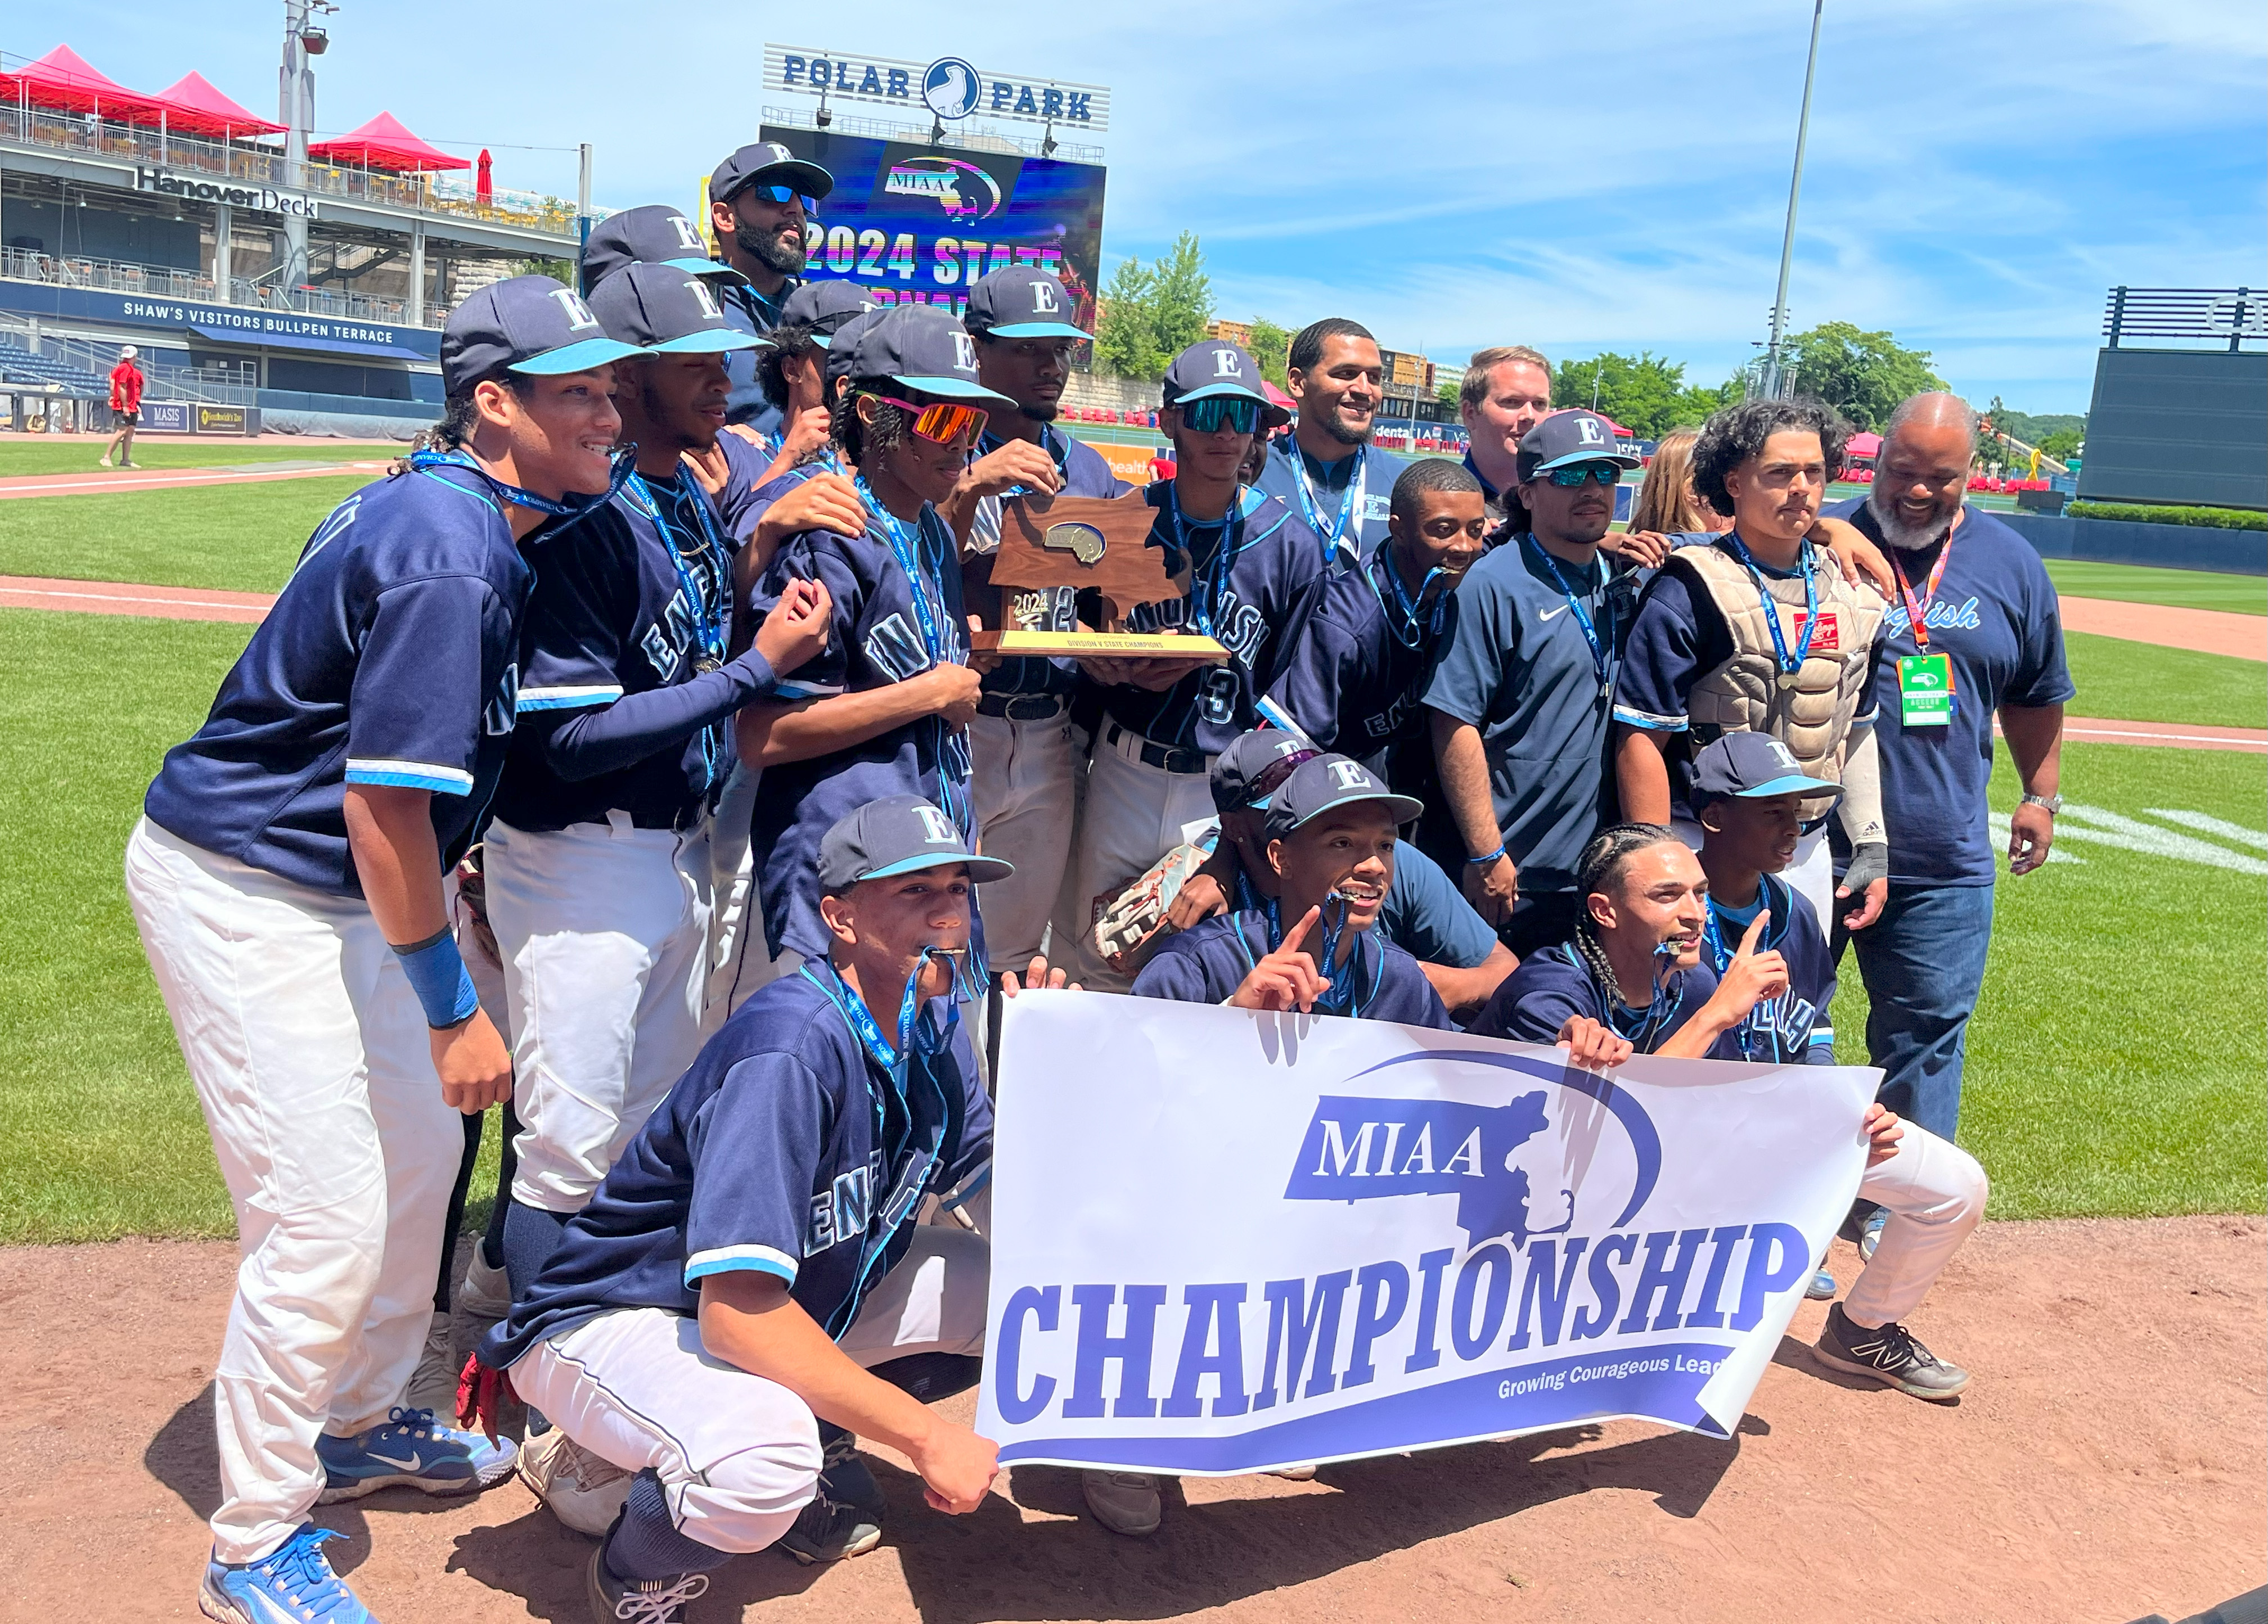 English High celebrated the first baseball championship in school history, and the first for a Boston City League school since 1971.